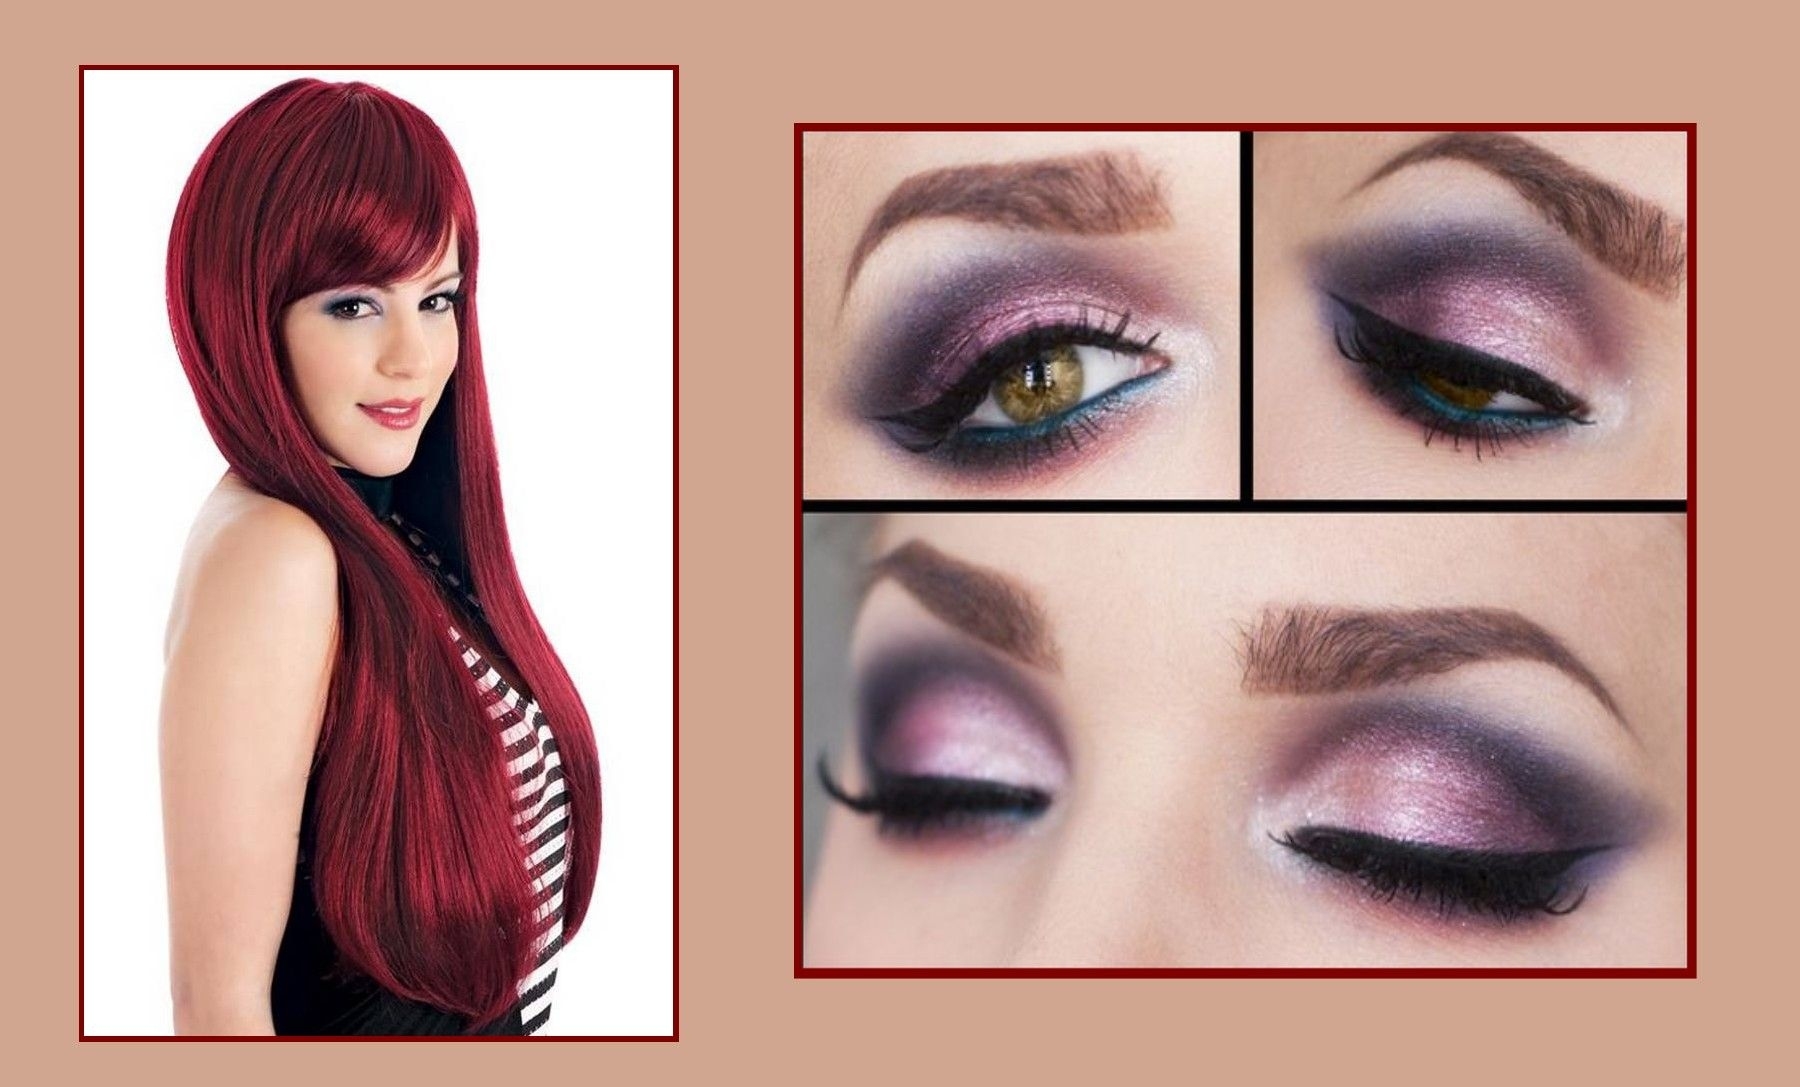 Makeup For Hazel Green Eyes | Makeup For Green Eyes And Red Hair intended for Makeup Tips For Red Hair And Green Eyes